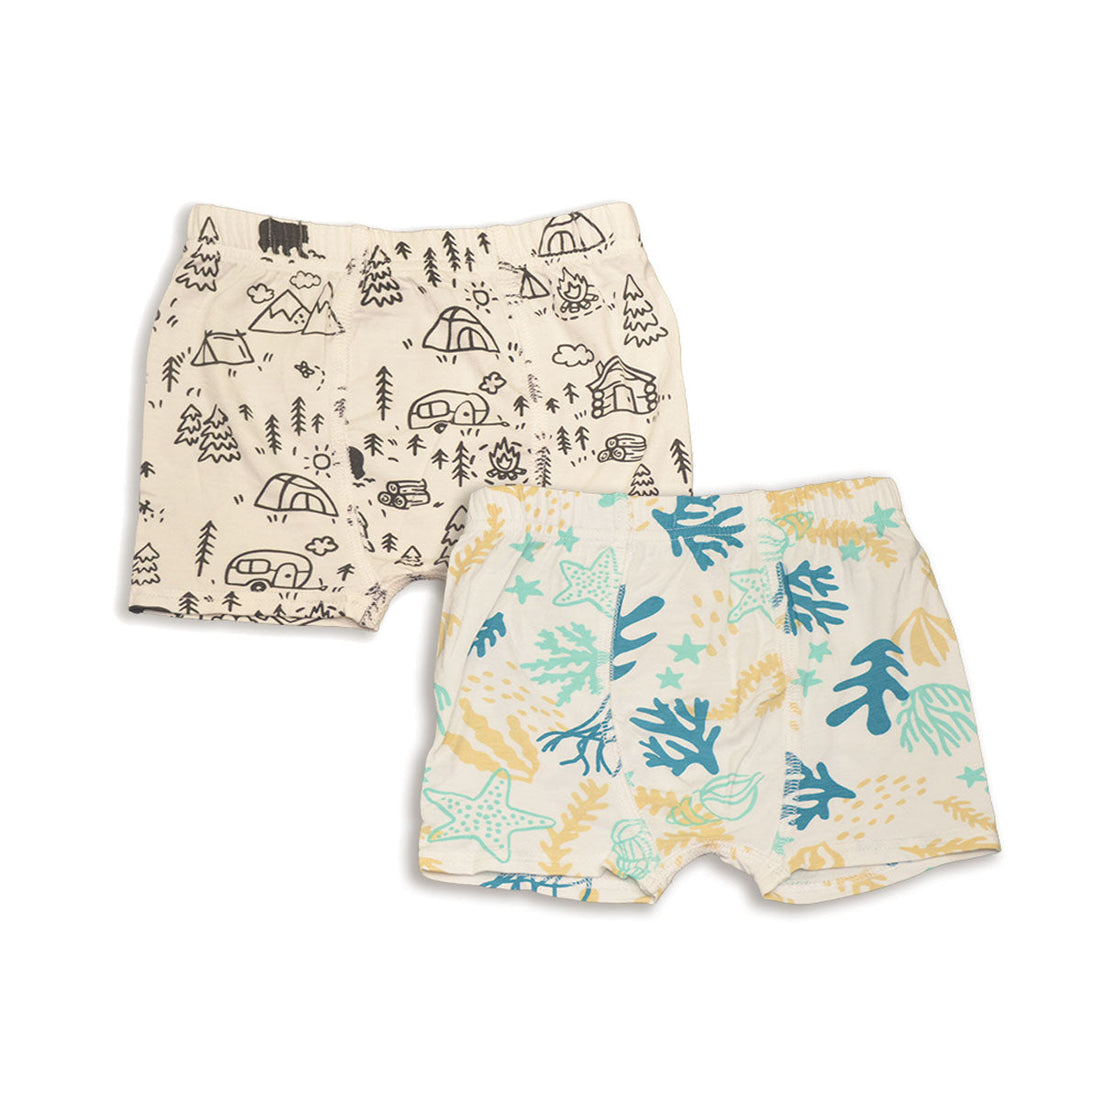 Bamboo Underwear Shorts 2 pack (Reef & Doodle Camp Print)